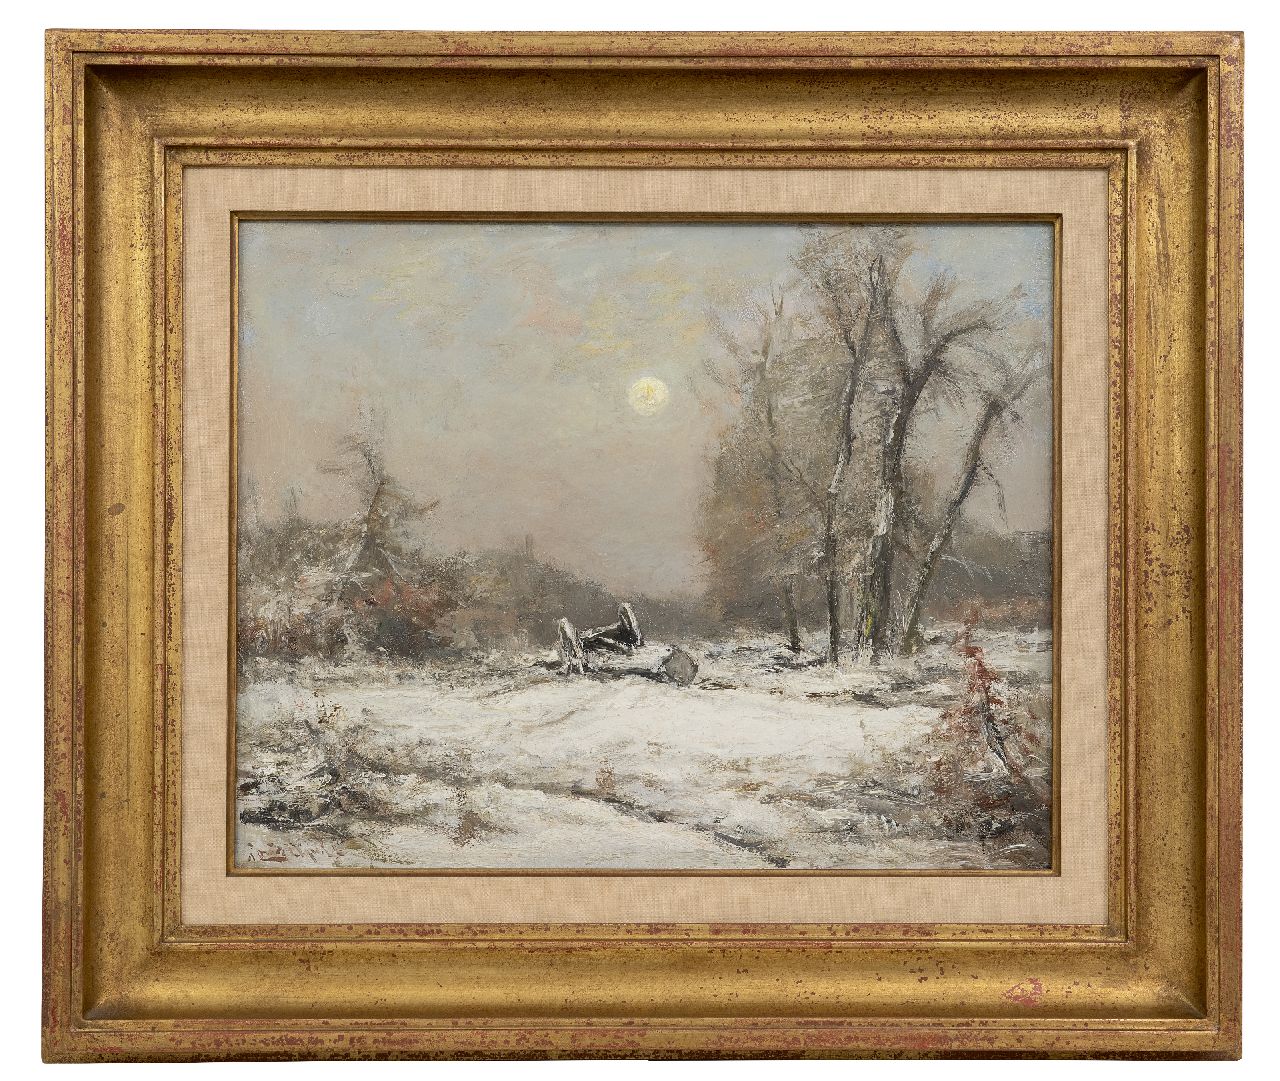 Apol L.F.H.  | Lodewijk Franciscus Hendrik 'Louis' Apol, Winter landscape by night, oil on canvas 39.9 x 50.4 cm, signed l.l.